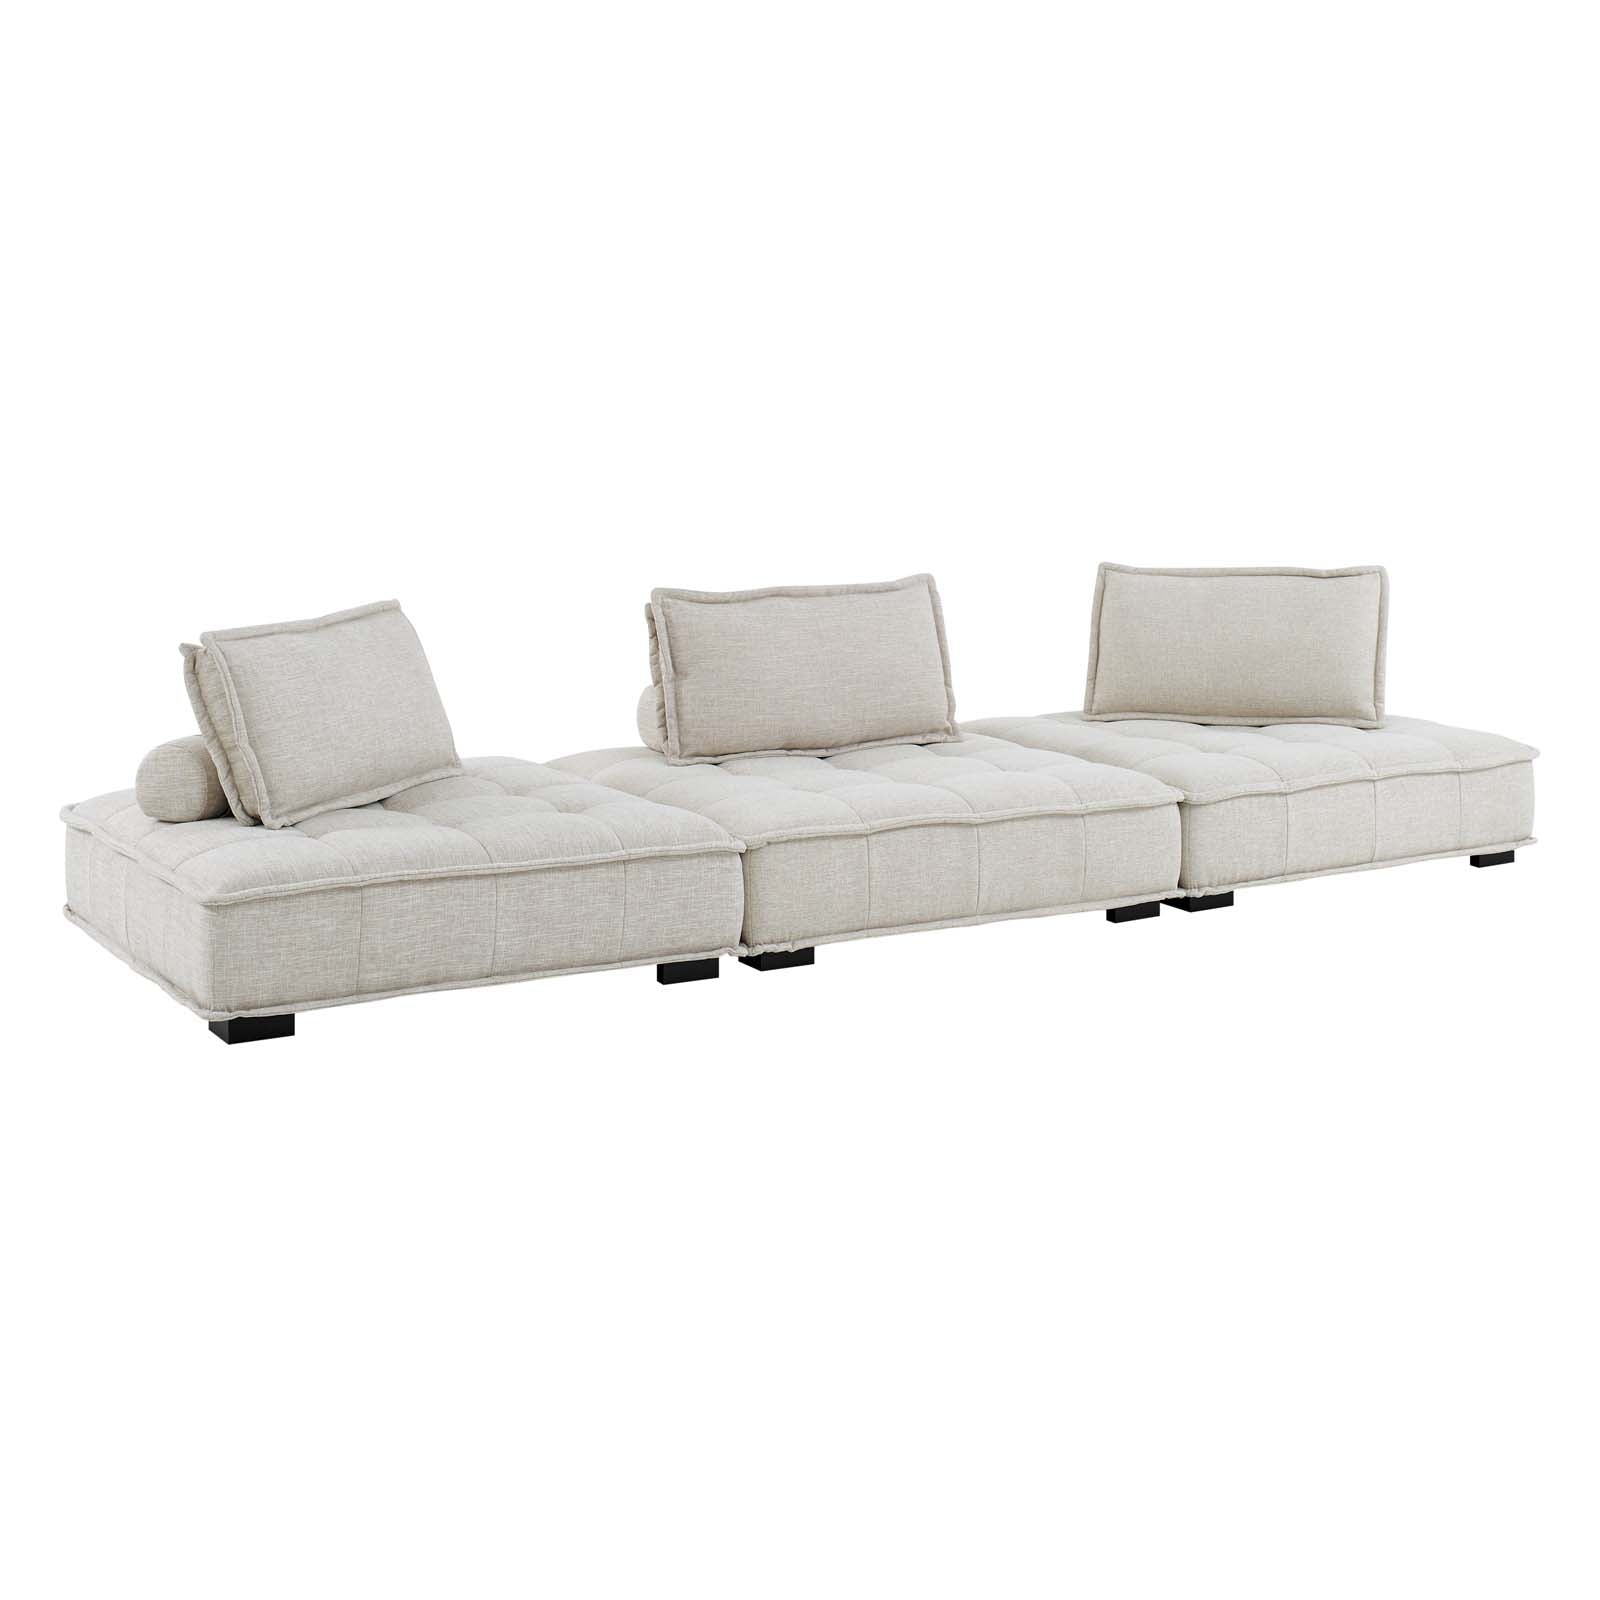 Modway Sofas & Couches - Saunter-Tufted-Fabric-Fabric-3-Piece-Sofa-Beige